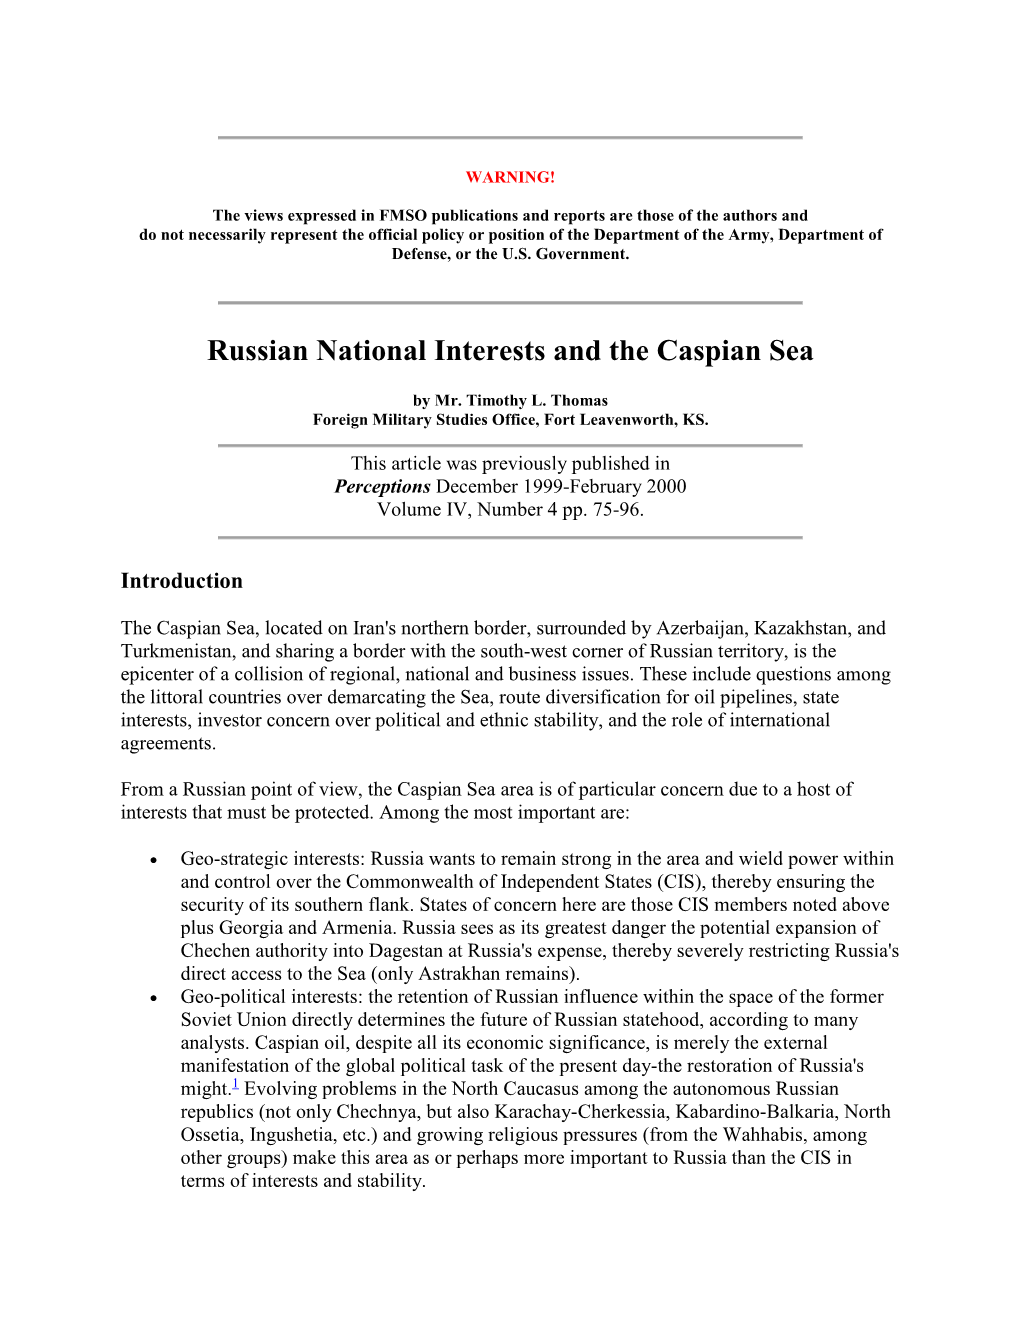 Russian National Interests and the Caspian Sea